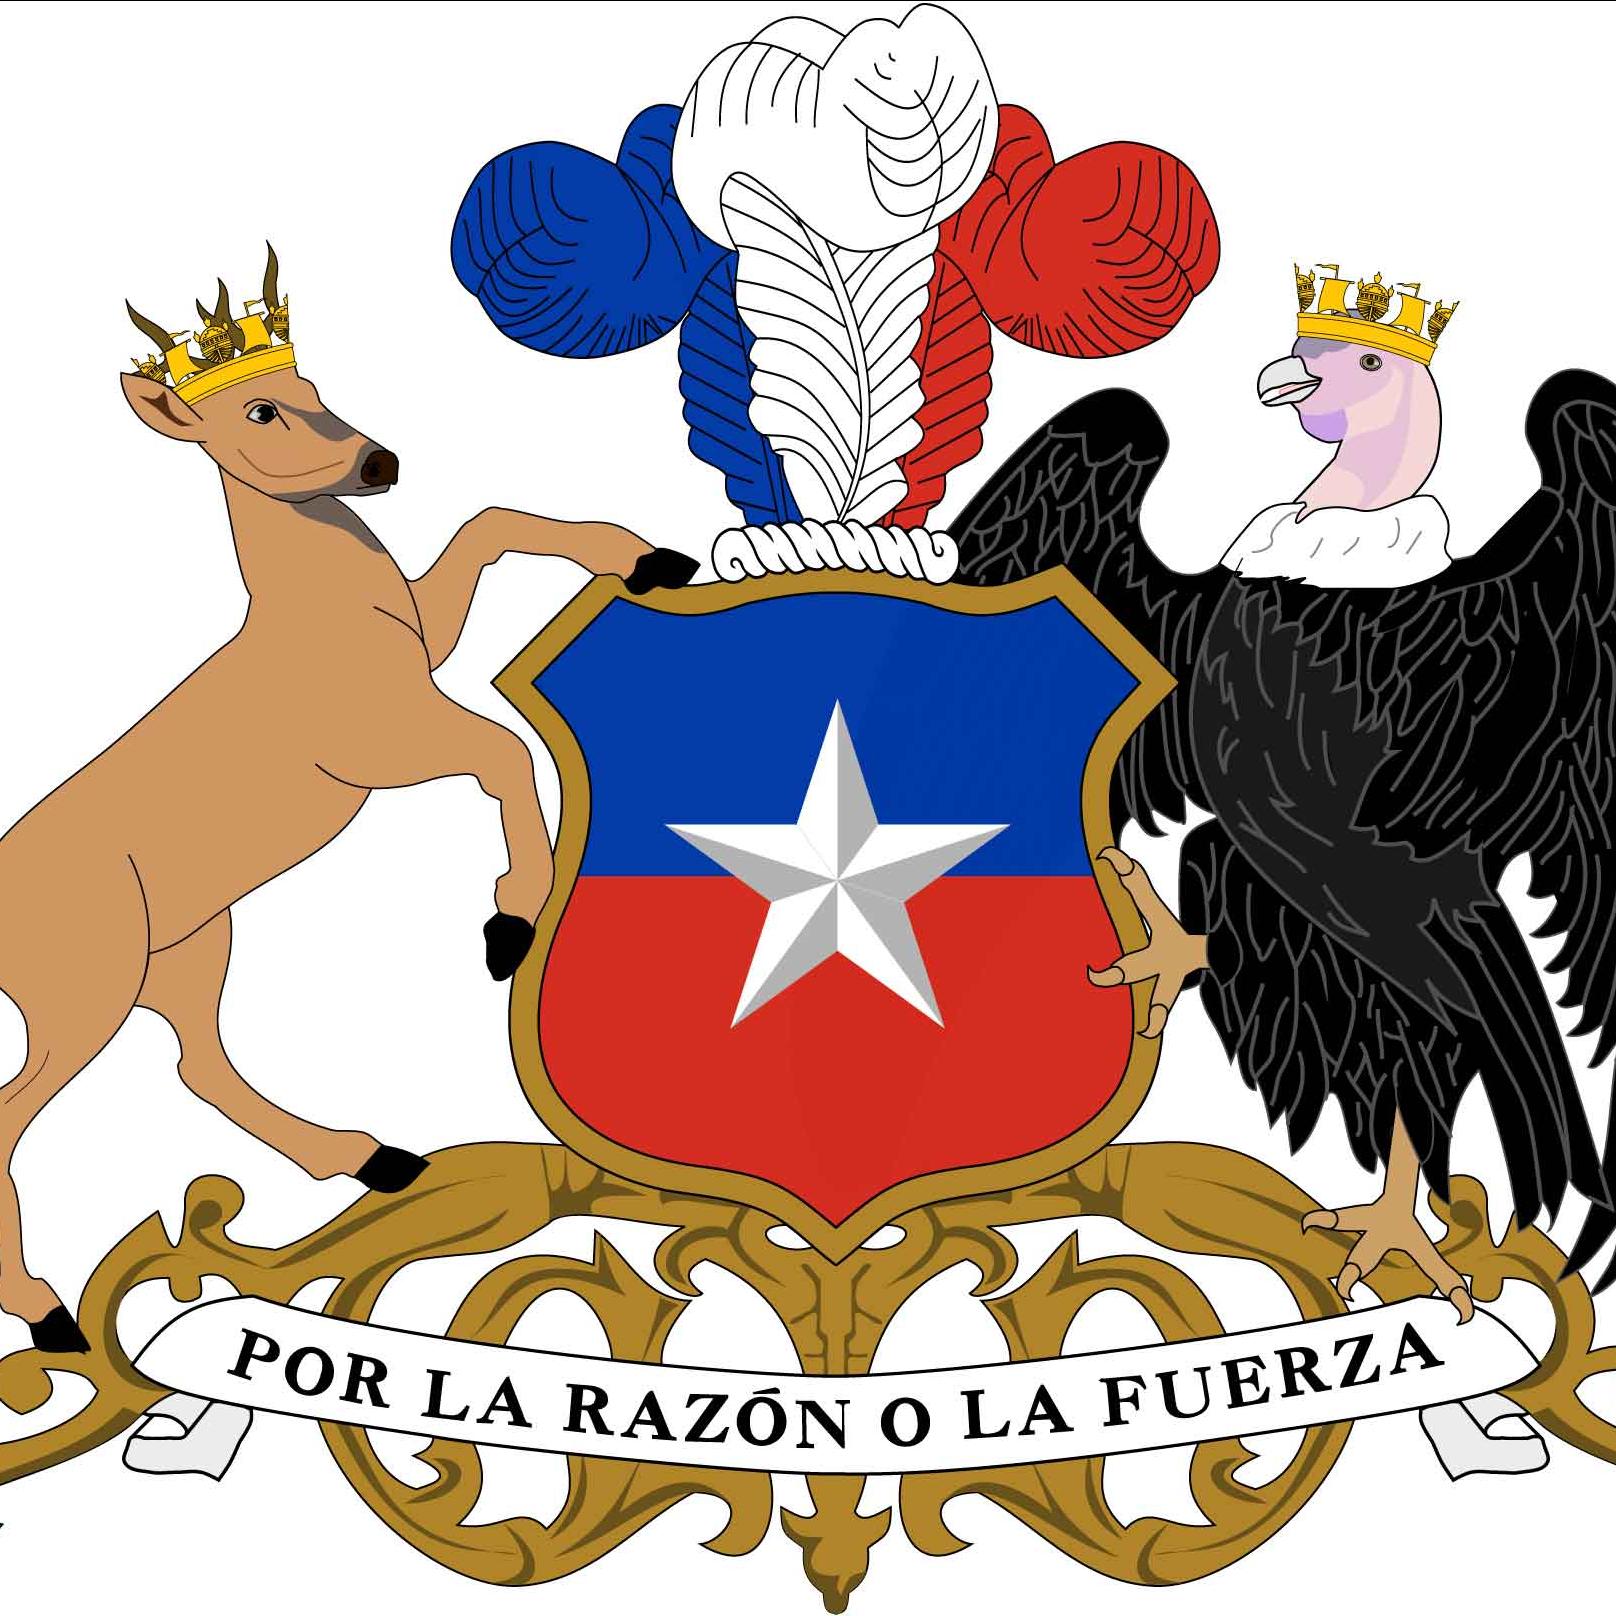 A stag with a crown rearing next to a shield with a star on it and feather plumes at the top; on the other side is a condor, also with a crown, and the text across the bottom "Por la razon o la fuerza"